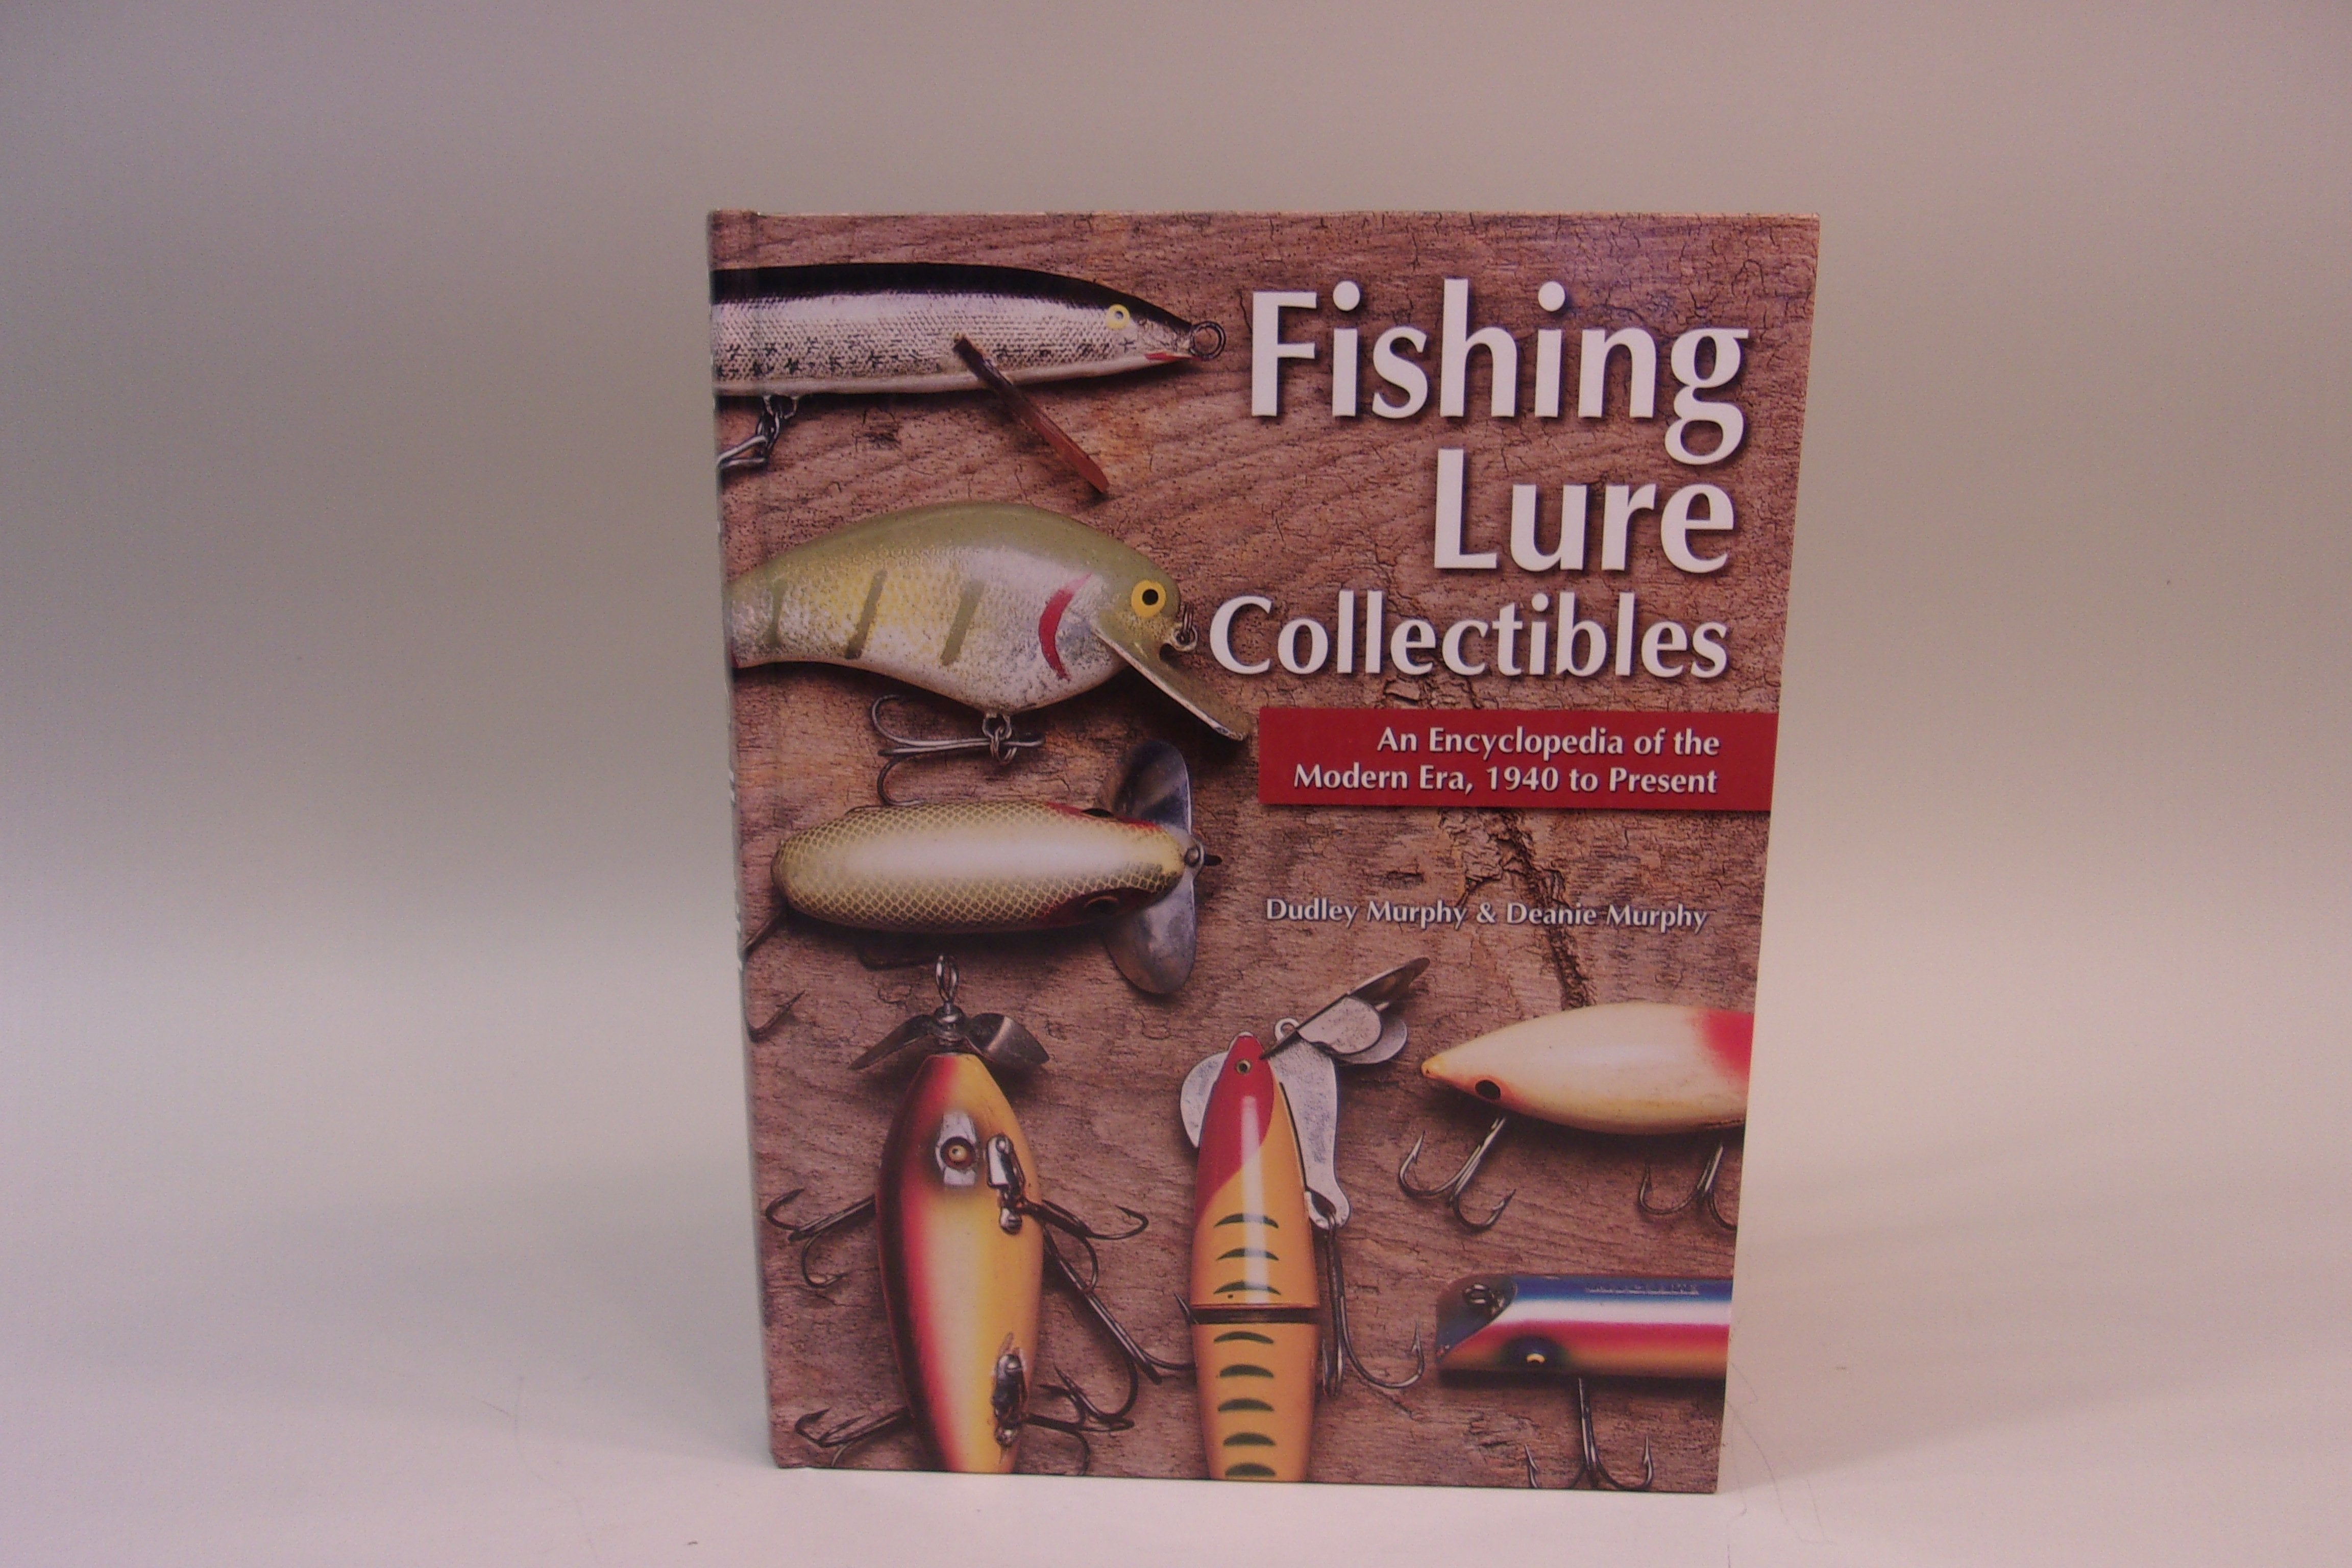 Fishing Lure Collectibles, Vol. 1: An Identification and Value Guide to the  Most Collectible Antique Fishing Lures (Fishing Lure Collectibles, 2nd Ed):  Dudley Murphy: 9781574321968: : Books